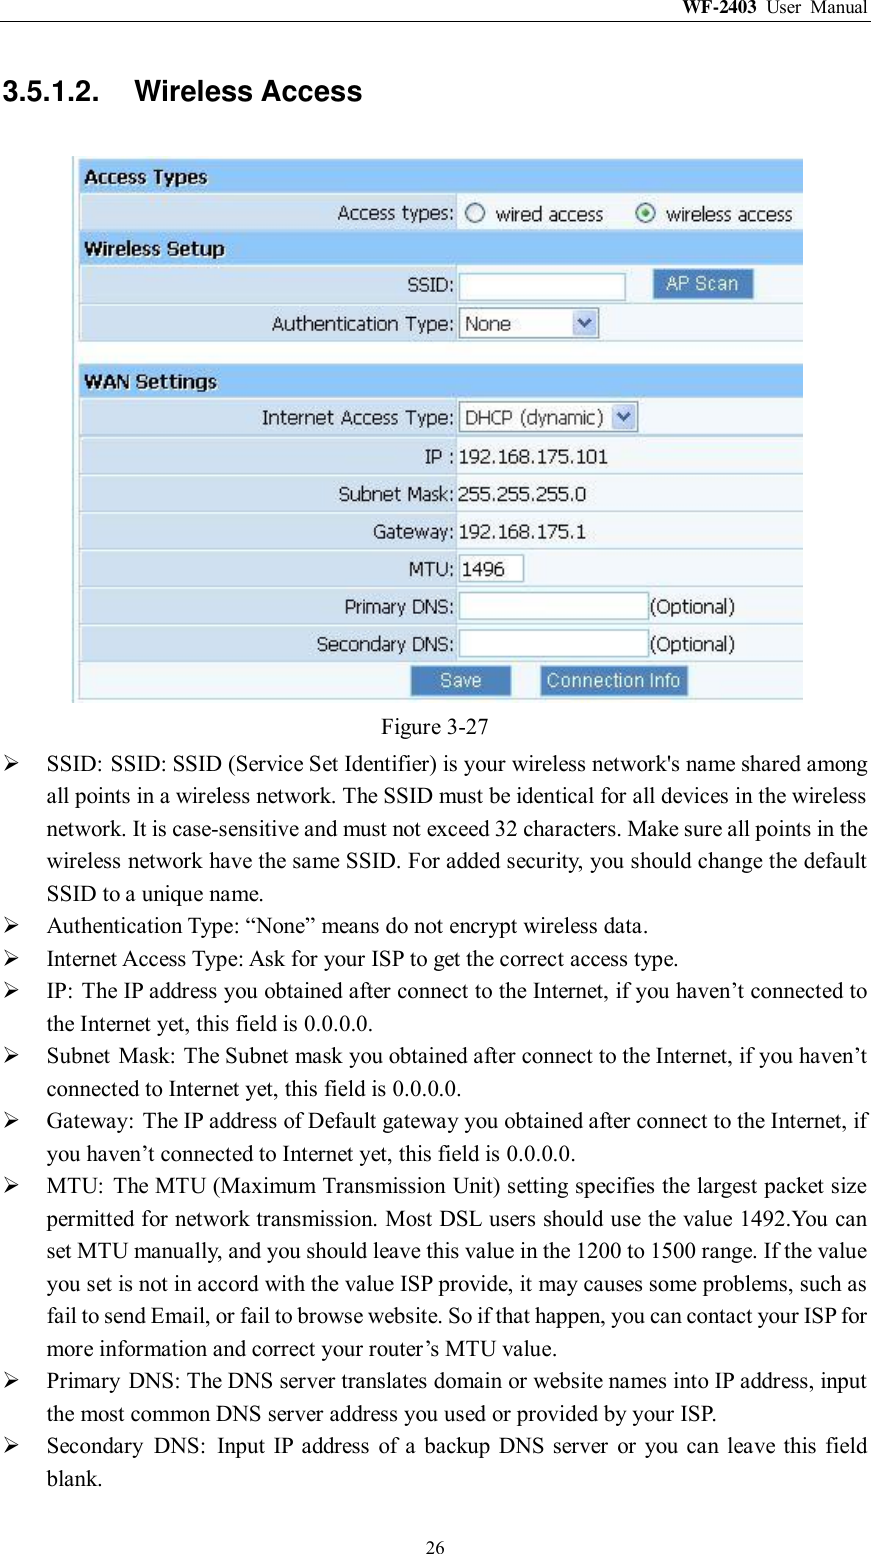 WF-2403  User  Manual  26 3.5.1.2.  Wireless Access  Figure 3-27  SSID: SSID: SSID (Service Set Identifier) is your wireless network&apos;s name shared among all points in a wireless network. The SSID must be identical for all devices in the wireless network. It is case-sensitive and must not exceed 32 characters. Make sure all points in the wireless network have the same SSID. For added security, you should change the default SSID to a unique name.  Authentication Type: “None” means do not encrypt wireless data.  Internet Access Type: Ask for your ISP to get the correct access type.  IP:  The IP address you obtained after connect to the Internet, if you haven‟t connected to the Internet yet, this field is 0.0.0.0.  Subnet  Mask: The Subnet mask you obtained after connect to the Internet, if you haven‟t connected to Internet yet, this field is 0.0.0.0.  Gateway:  The IP address of Default gateway you obtained after connect to the Internet, if you haven‟t connected to Internet yet, this field is 0.0.0.0.  MTU:  The MTU (Maximum Transmission Unit) setting specifies the largest packet size permitted for network transmission. Most DSL users should use the value 1492.You can set MTU manually, and you should leave this value in the 1200 to 1500 range. If the value you set is not in accord with the value ISP provide, it may causes some problems, such as fail to send Email, or fail to browse website. So if that happen, you can contact your ISP for more information and correct your router‟s MTU value.  Primary  DNS: The DNS server translates domain or website names into IP address, input the most common DNS server address you used or provided by your ISP.  Secondary  DNS:  Input IP  address  of  a  backup DNS server  or  you  can leave this  field blank. 